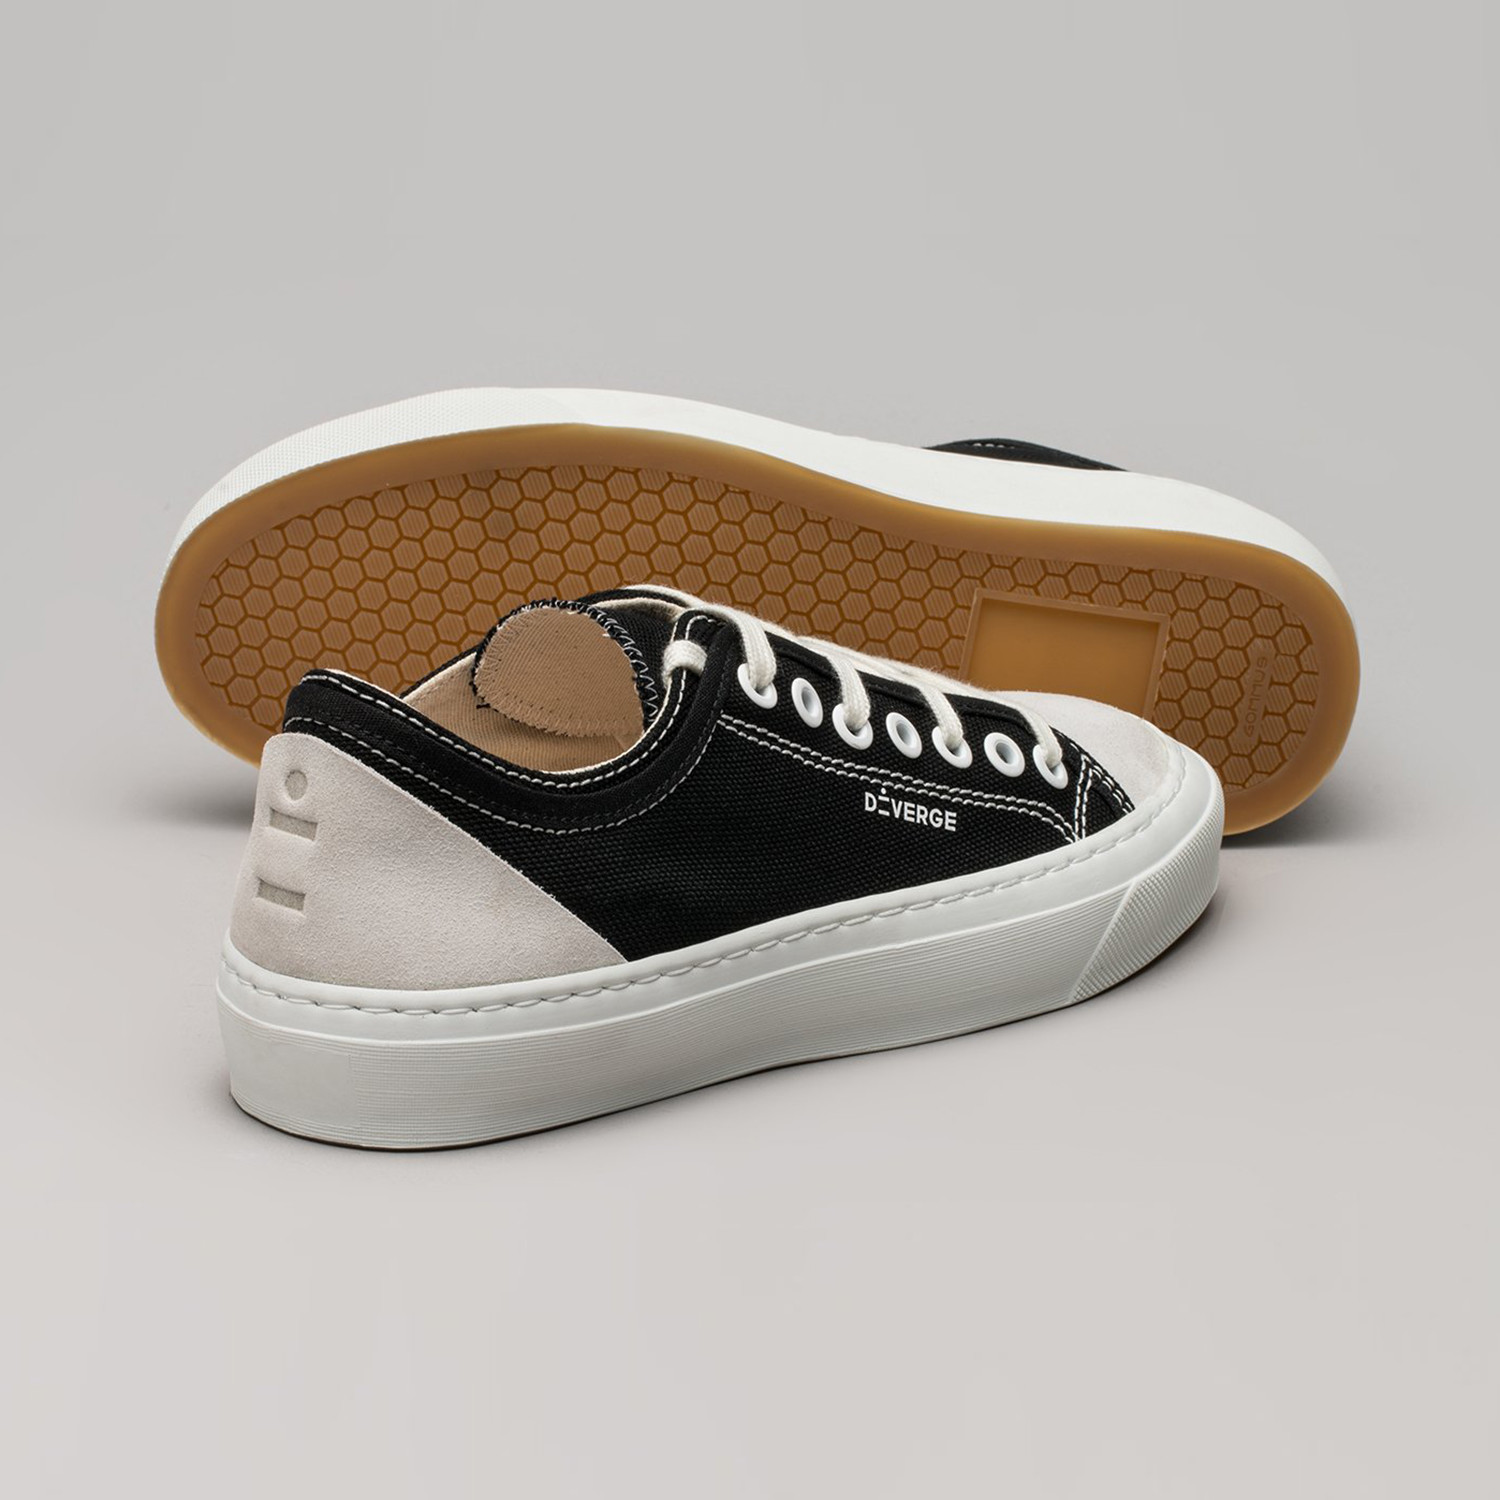 Full Color Canvas Sneakers V2 // Black (US: 10.5) - Diverge Sneakers ...